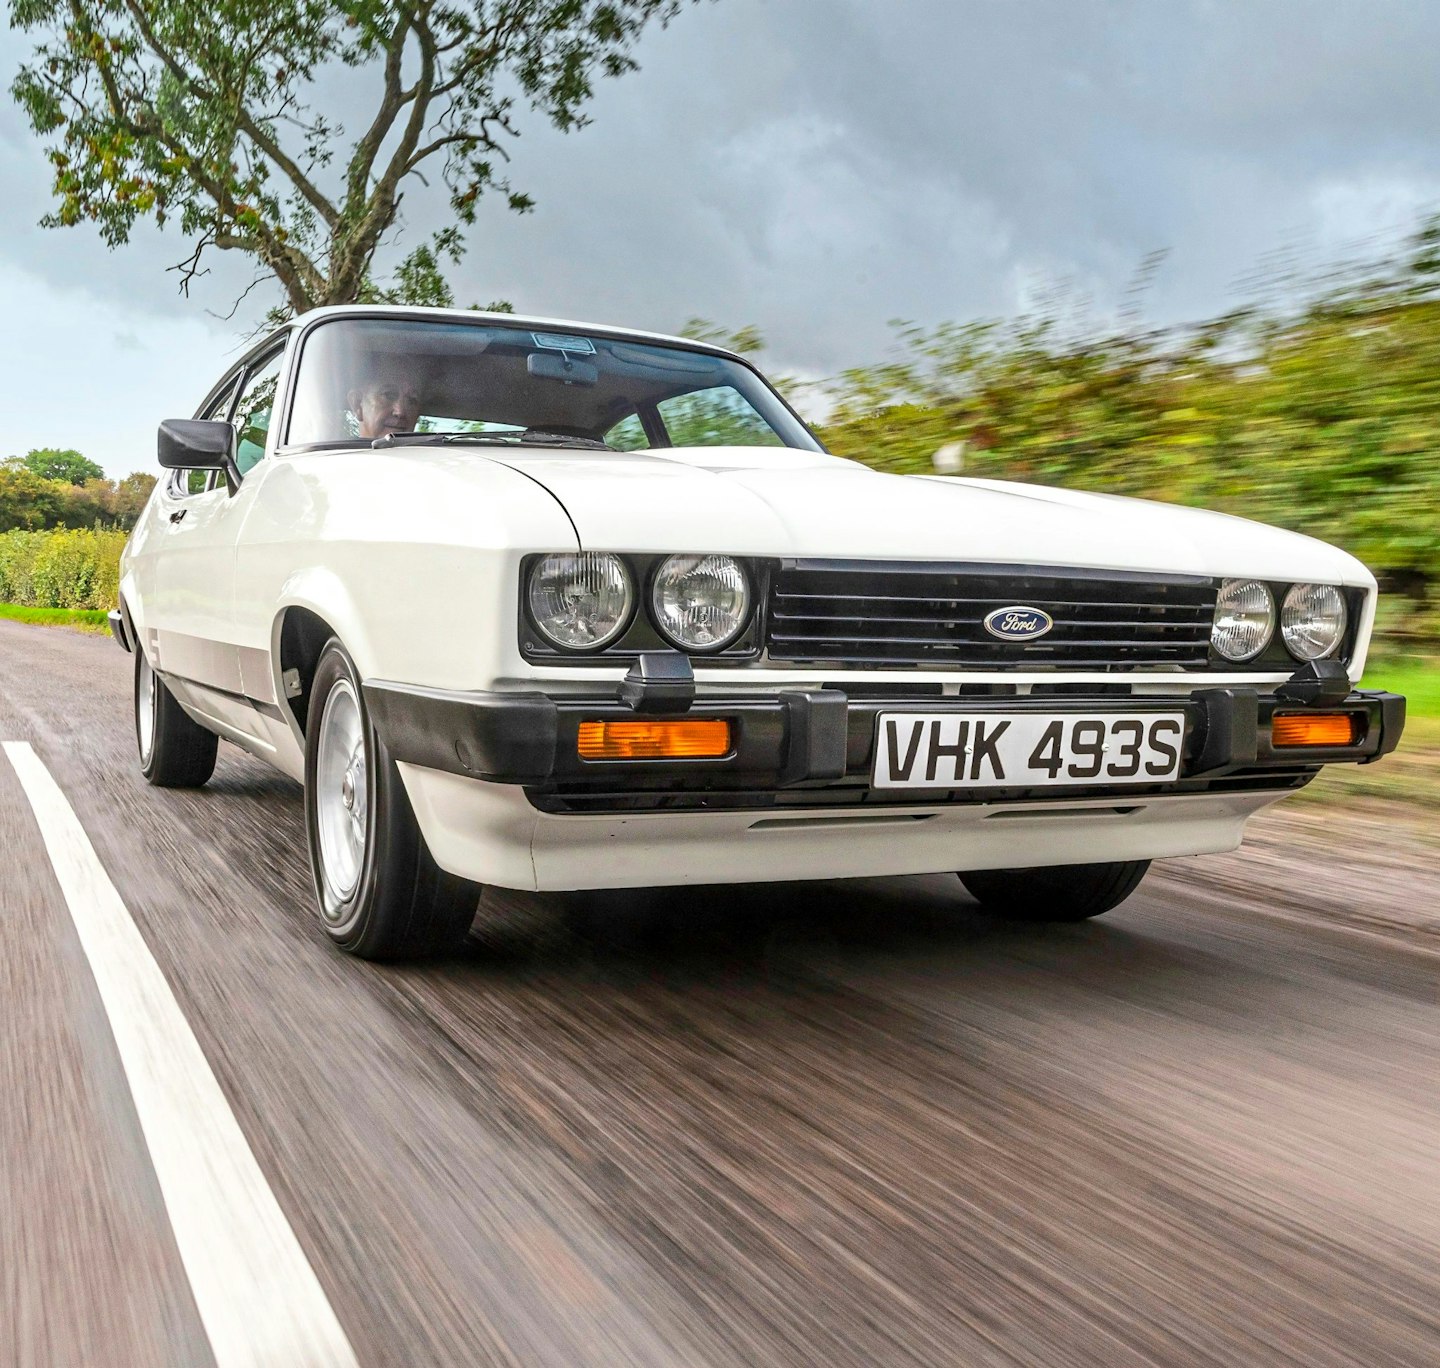 the-life-story-of-a-Ford-Capri-3.0S